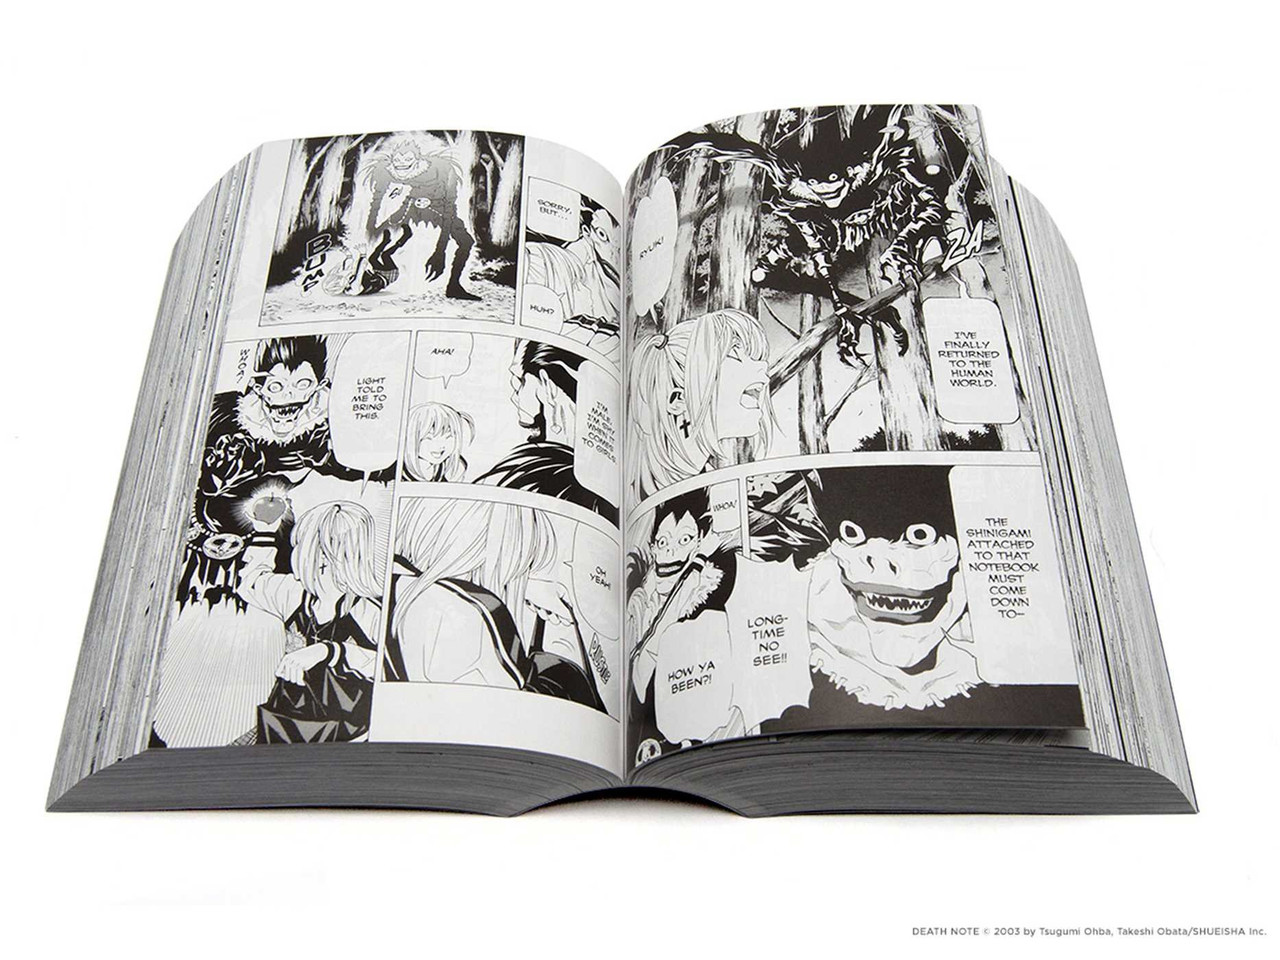 DEATH NOTE SLIPCASE GN ALL IN ONE EDITION